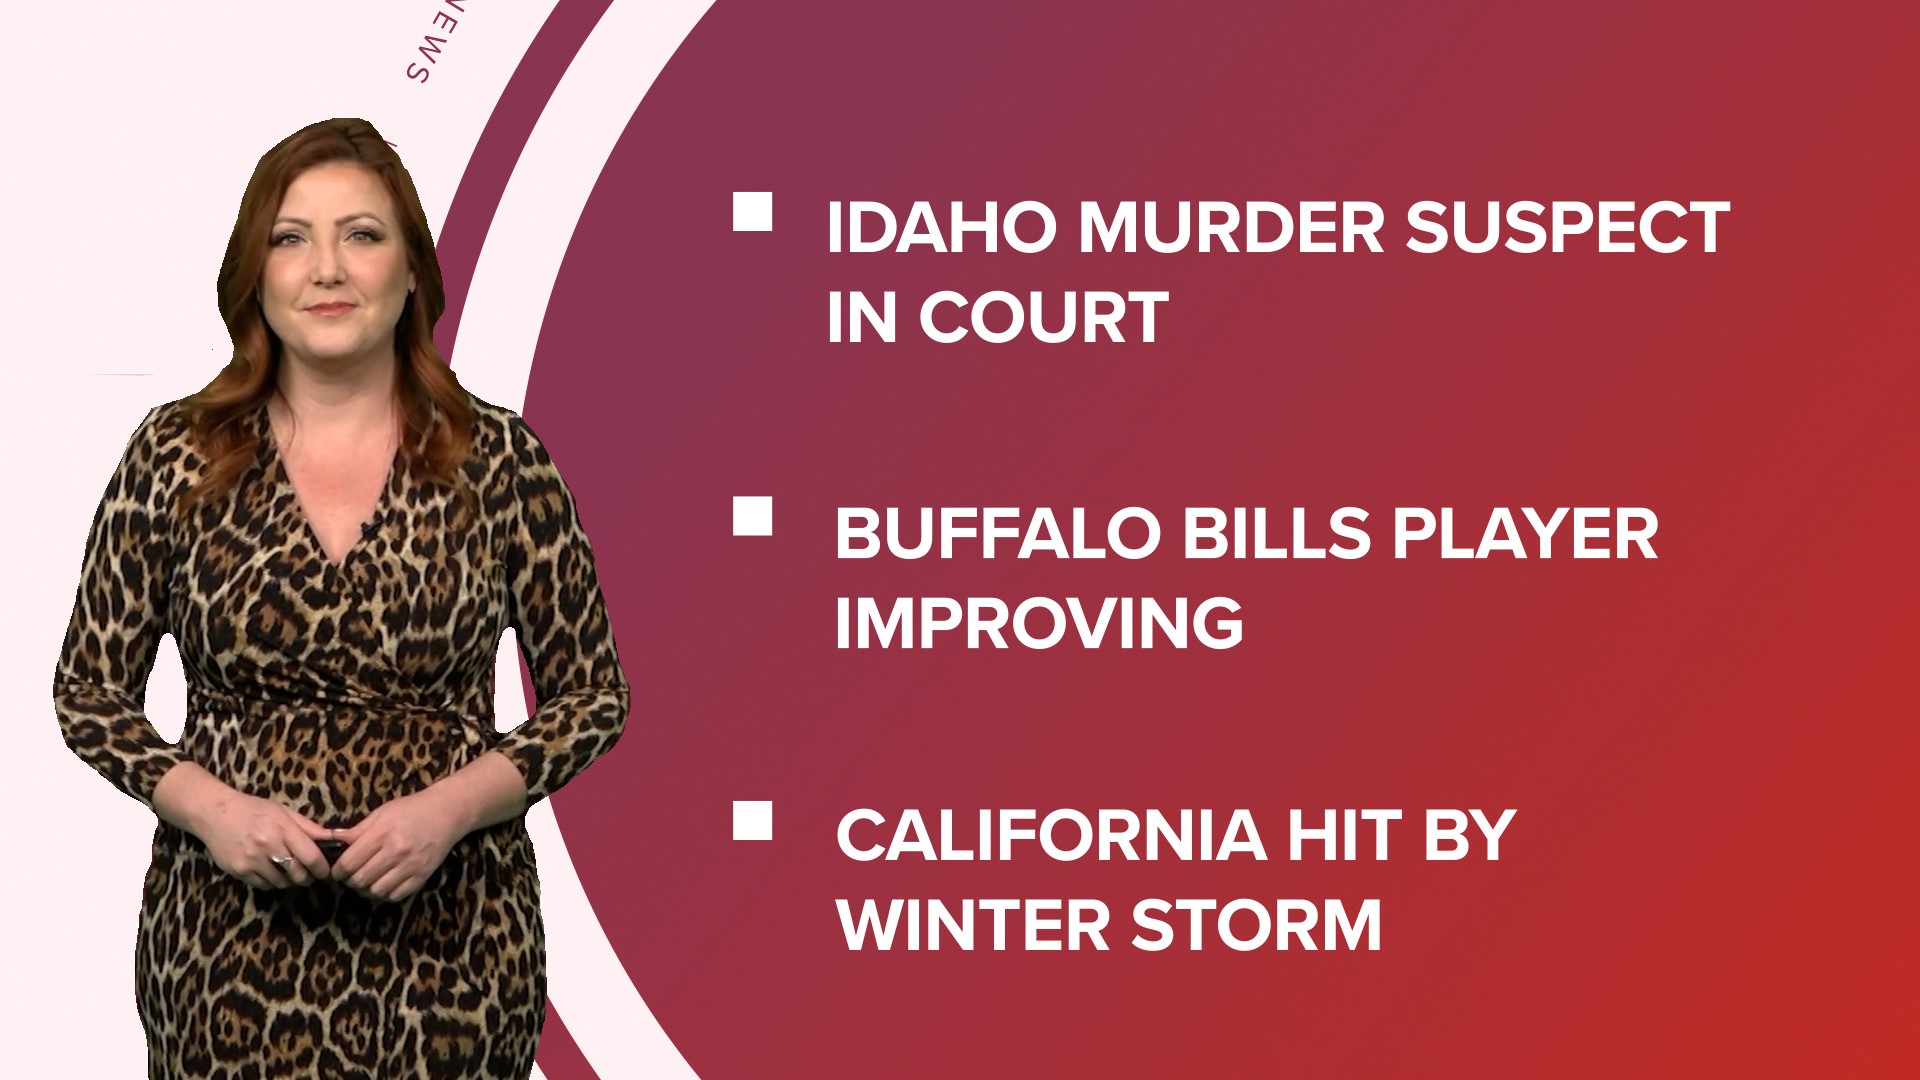 A look at what is happening in the news from an update on the suspect in the Idaho murders to an abortion law change in South Carolina.